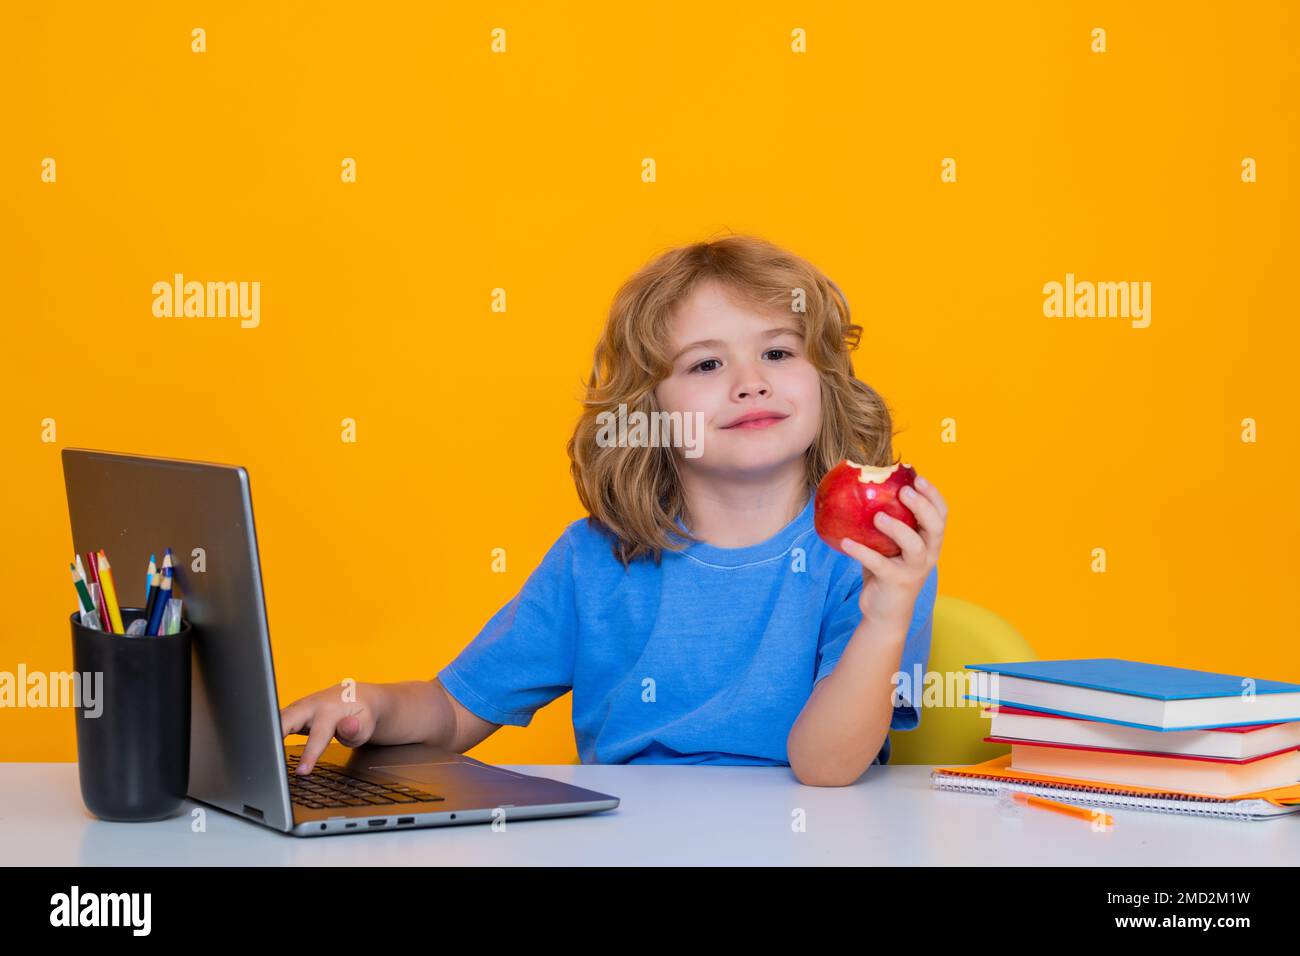 School kid 7-8 years old with book go back to school. Little student. Education concept. Stock Photo